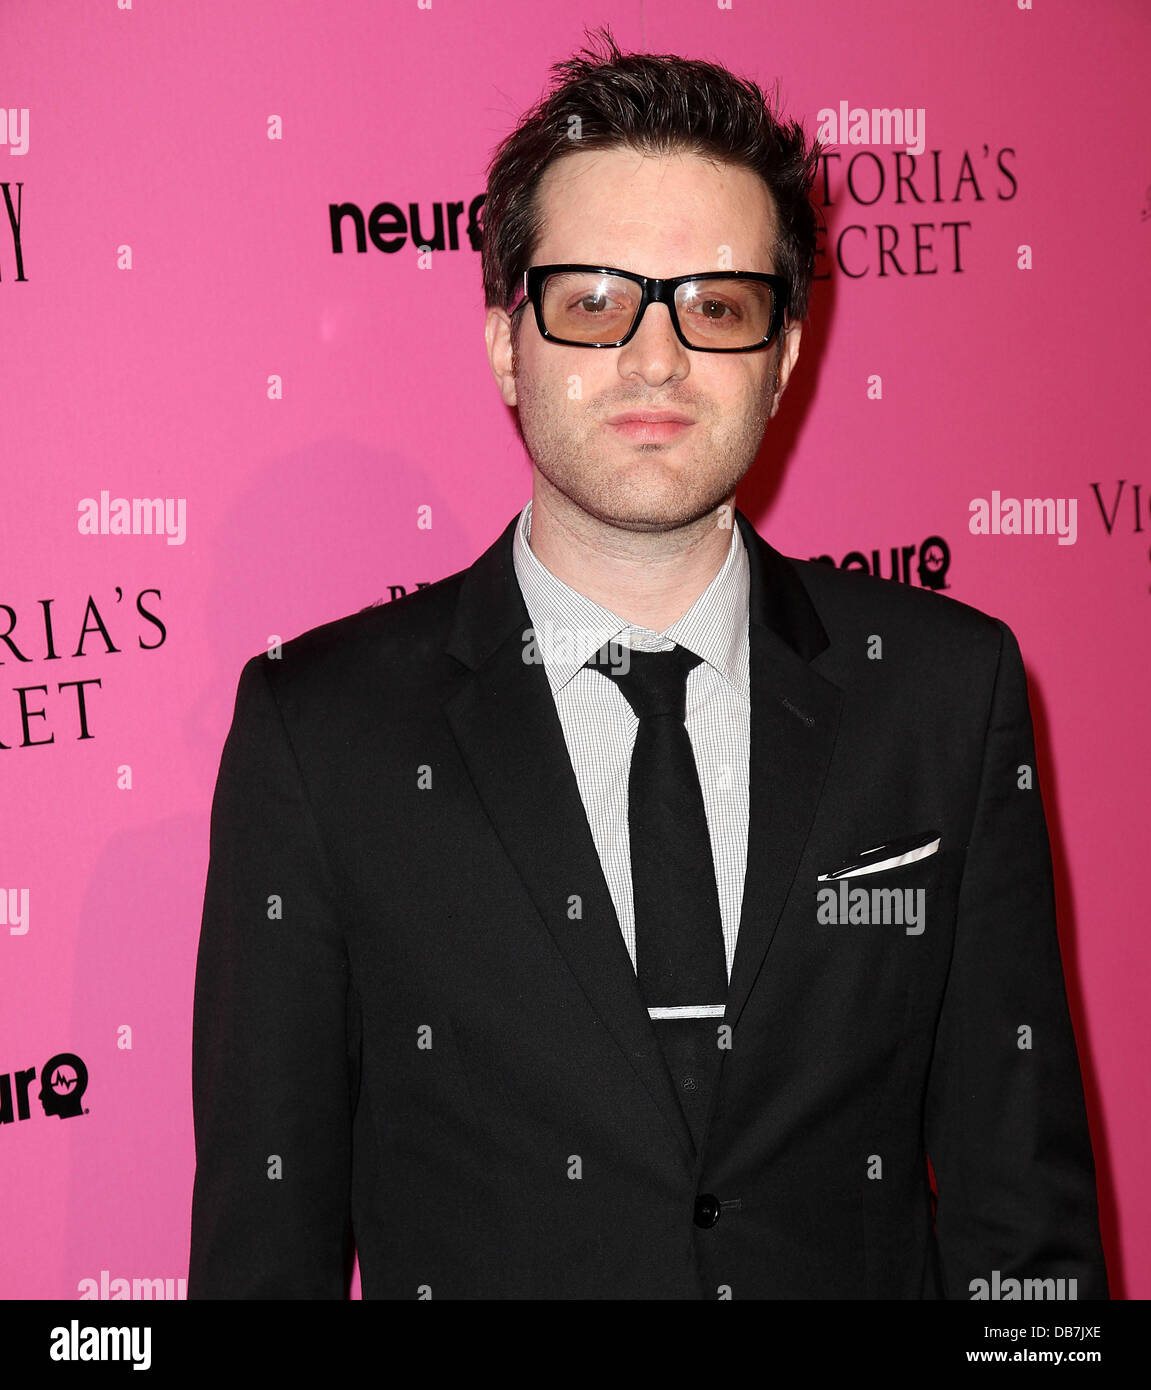 Mayer Hawthorne Victoria's Secret 6th Annual 'What Is Sexy? List: Bombshell Summer Edition' event held at The Beverly Los Angeles, California - 12.05.11 Stock Photo